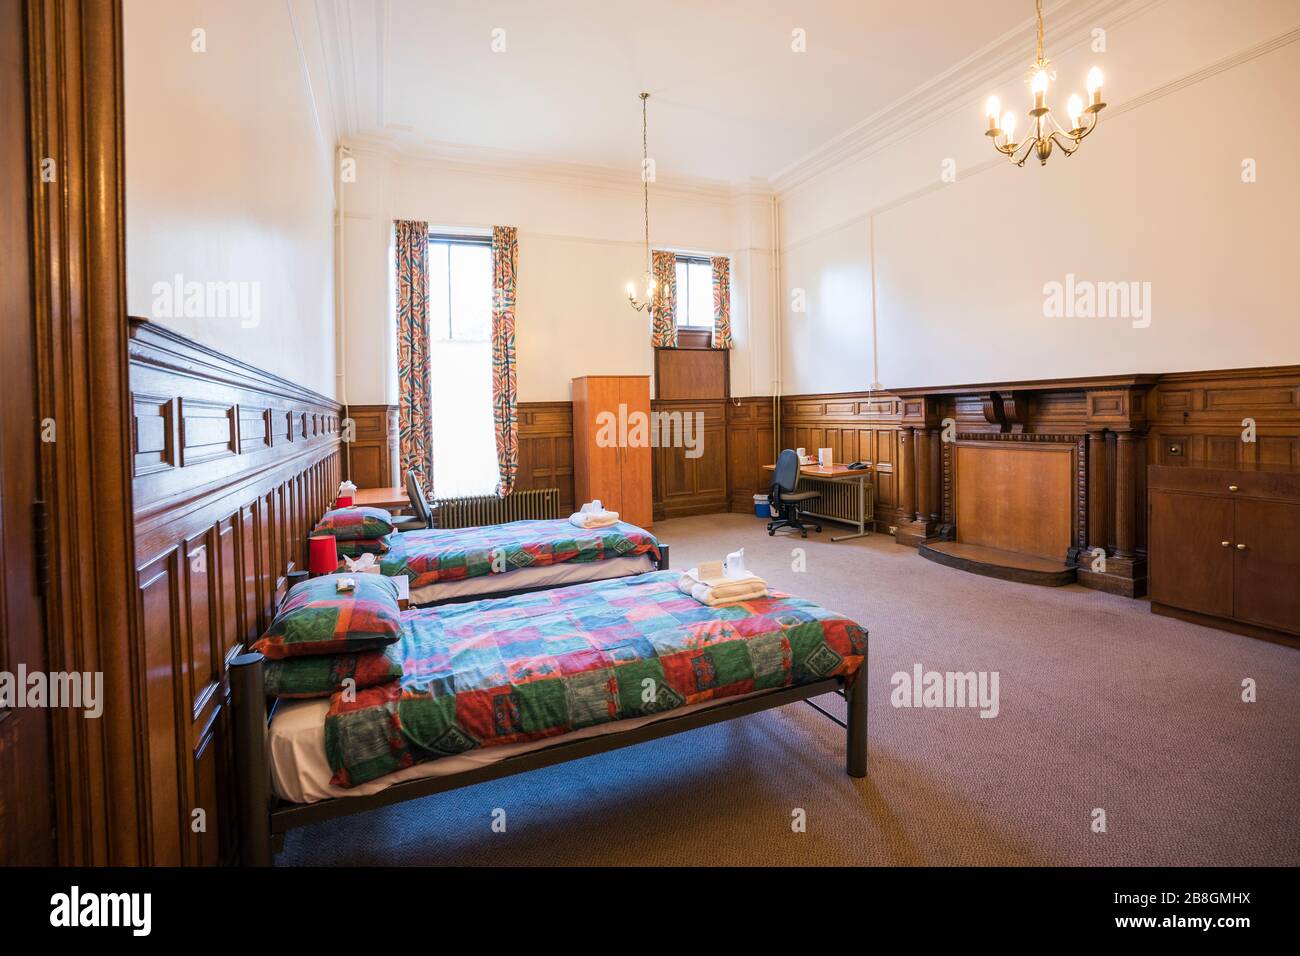 Interior of a female dorm room with chandeliers, tall ceilings, wooden panelsing and twin beds that is open to  public housing in summer months, St. A Stock Photo